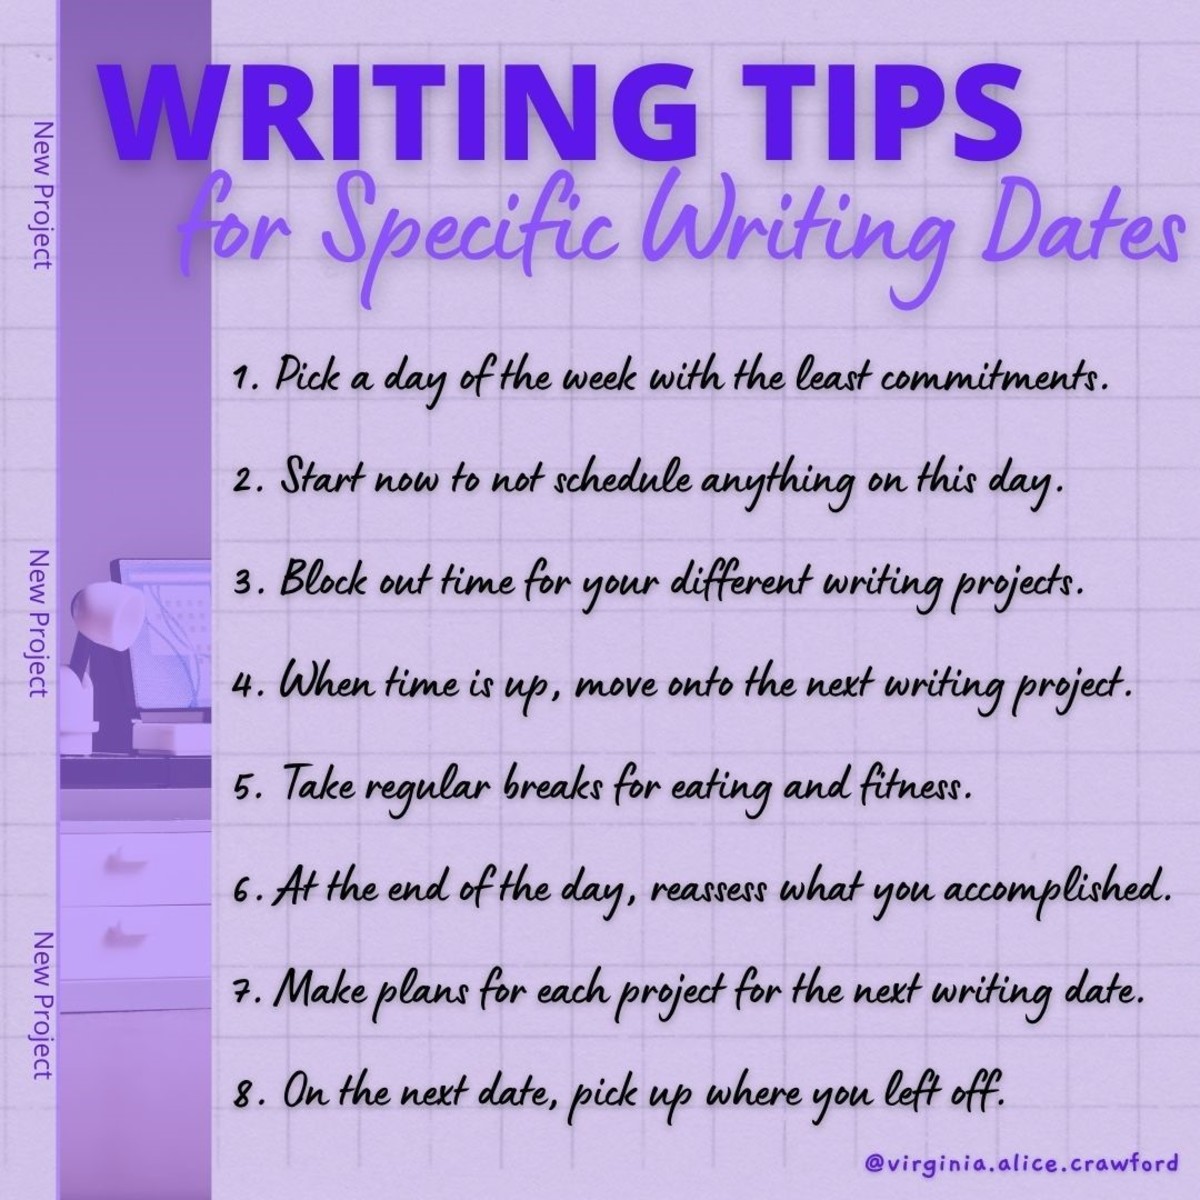 Writing Tips for Writing on a Schedule